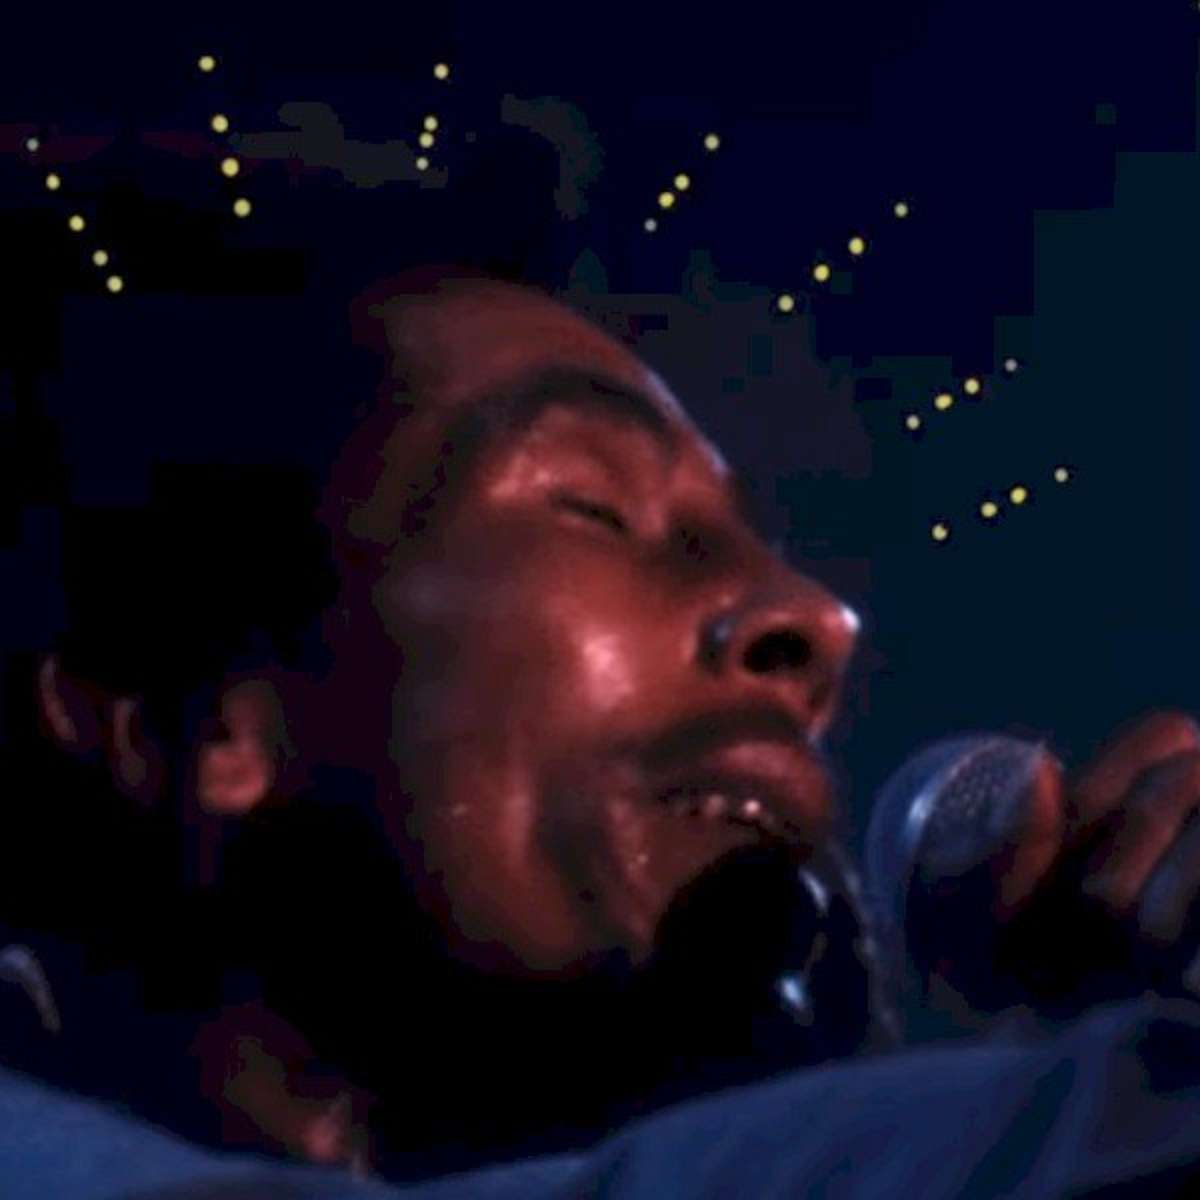 Bob Marley & The Wailers - Jamming (Official Music Video) 